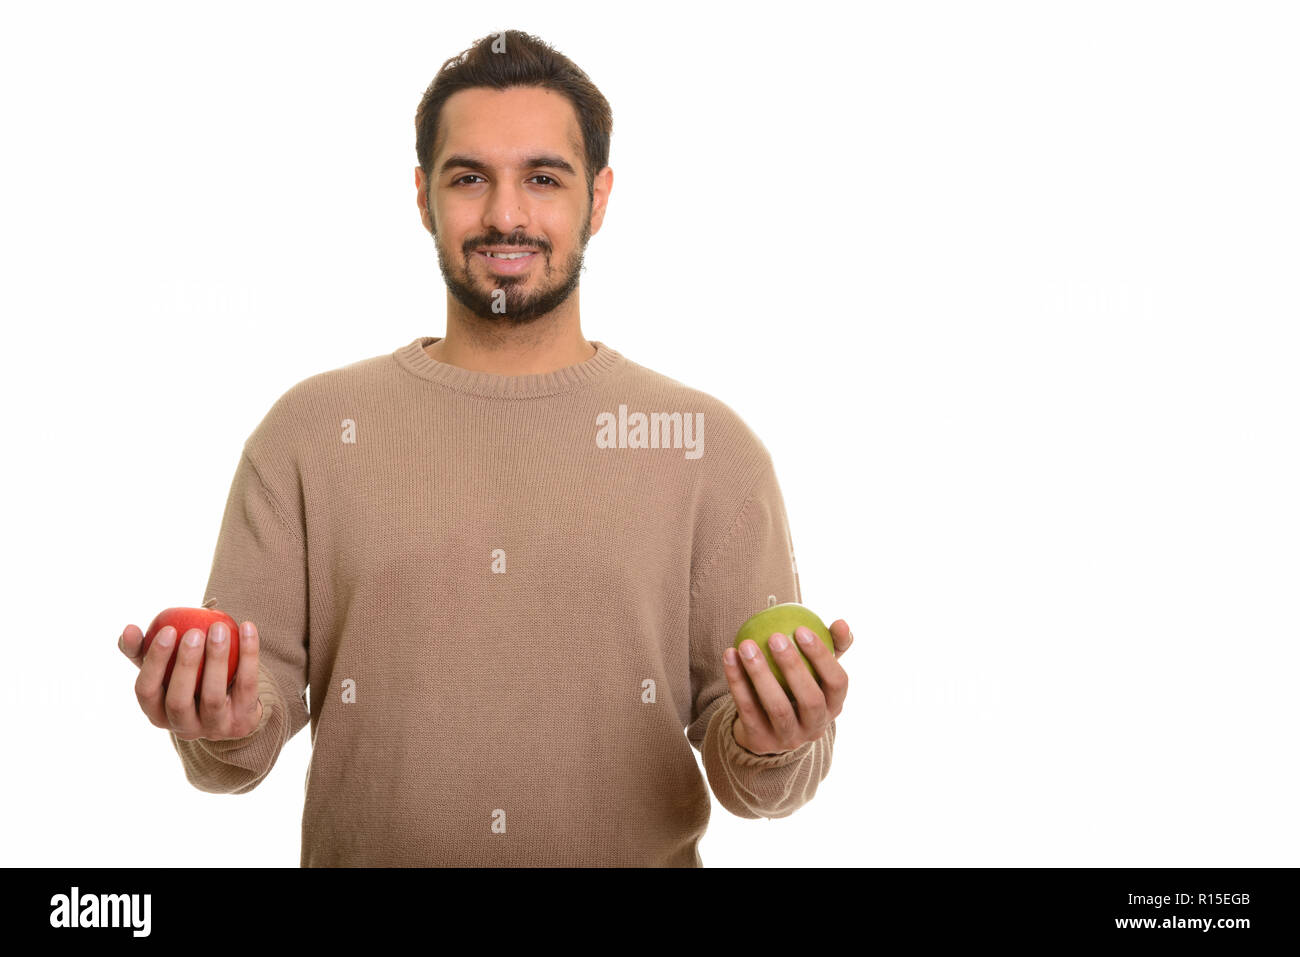 Young happy Indian man holding red et green apple Banque D'Images